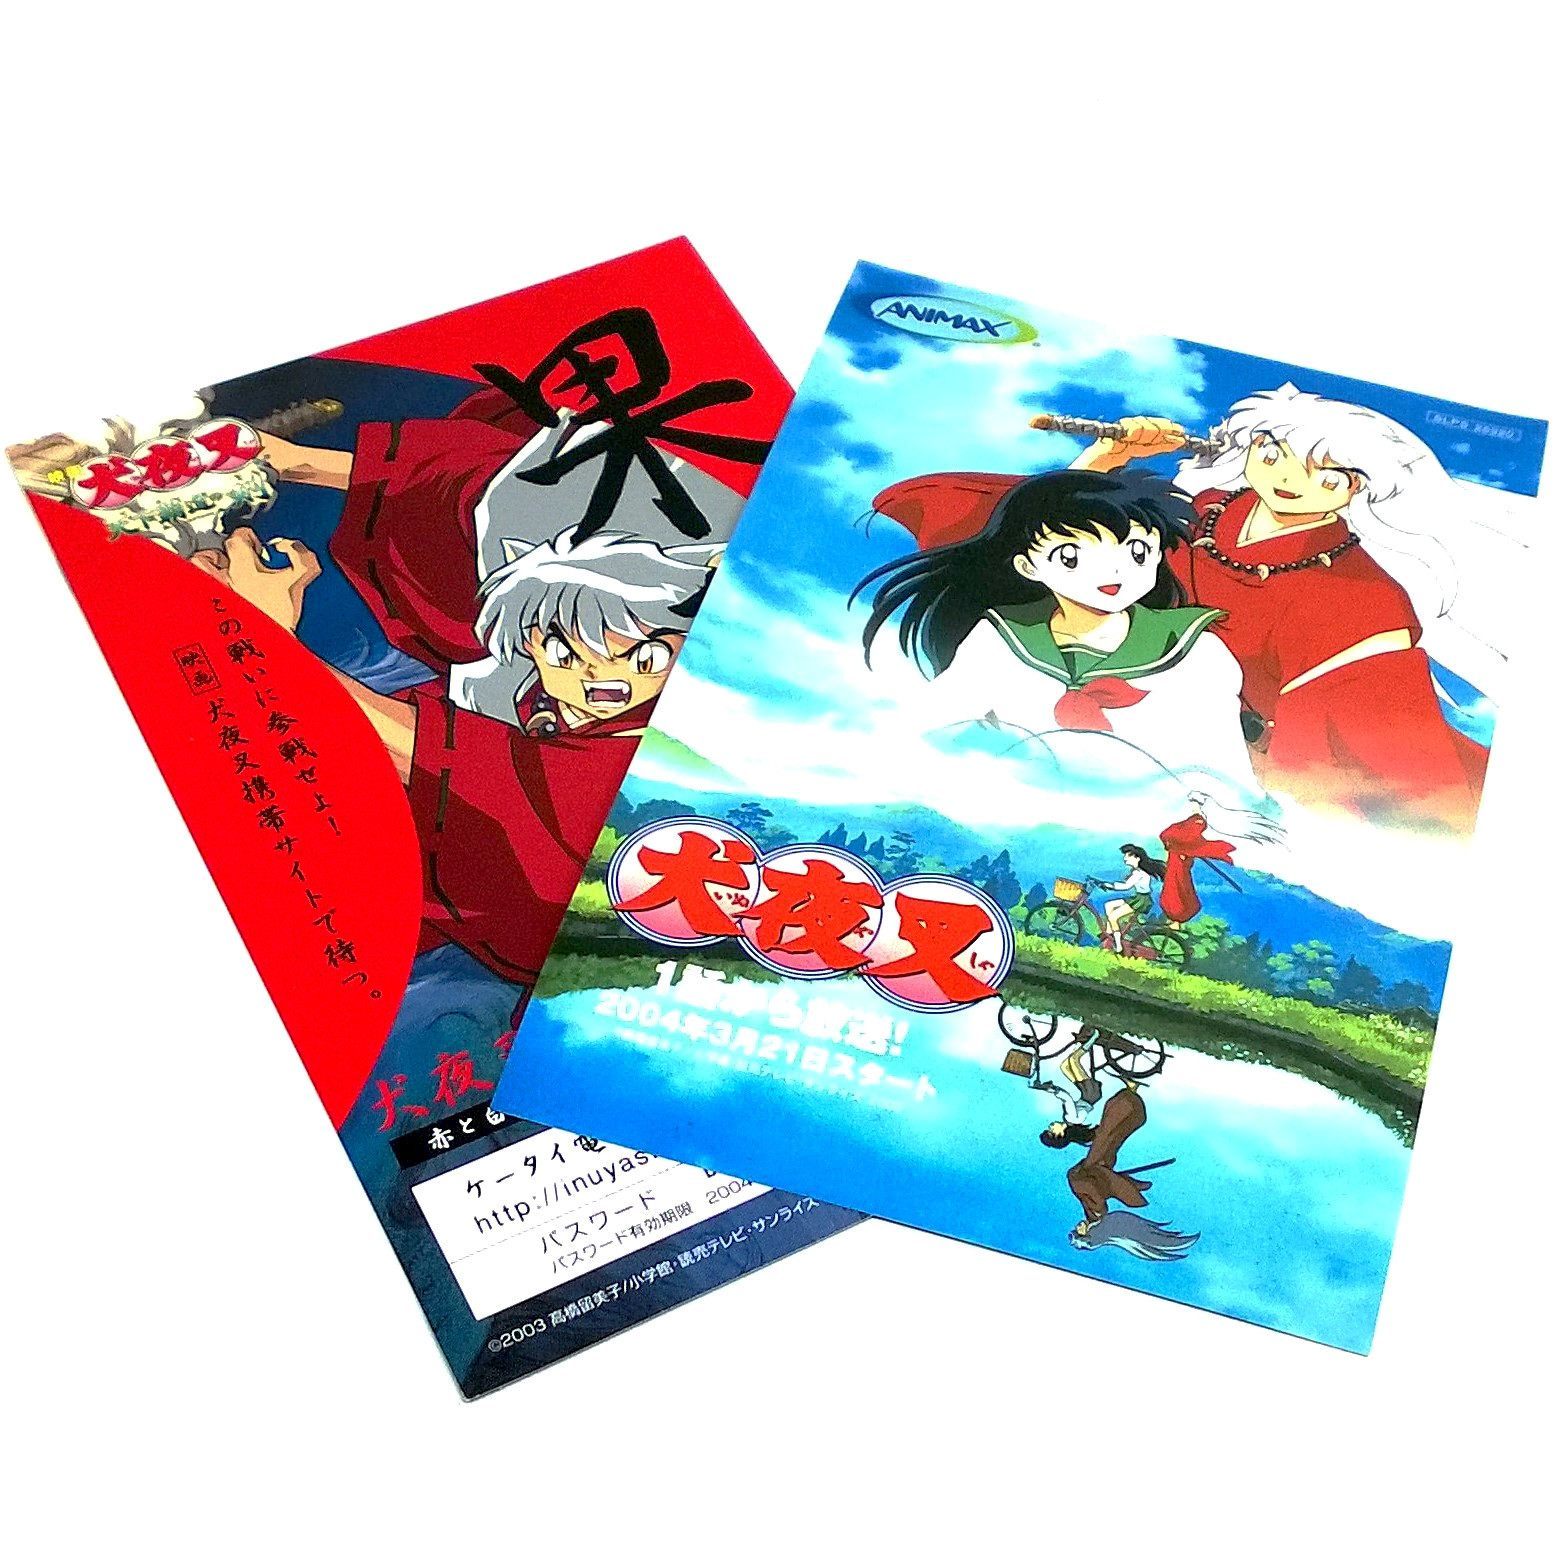 Inuyasha: Juuso no Kamen for PlayStation 2 (Import) - Promo insert and sticker